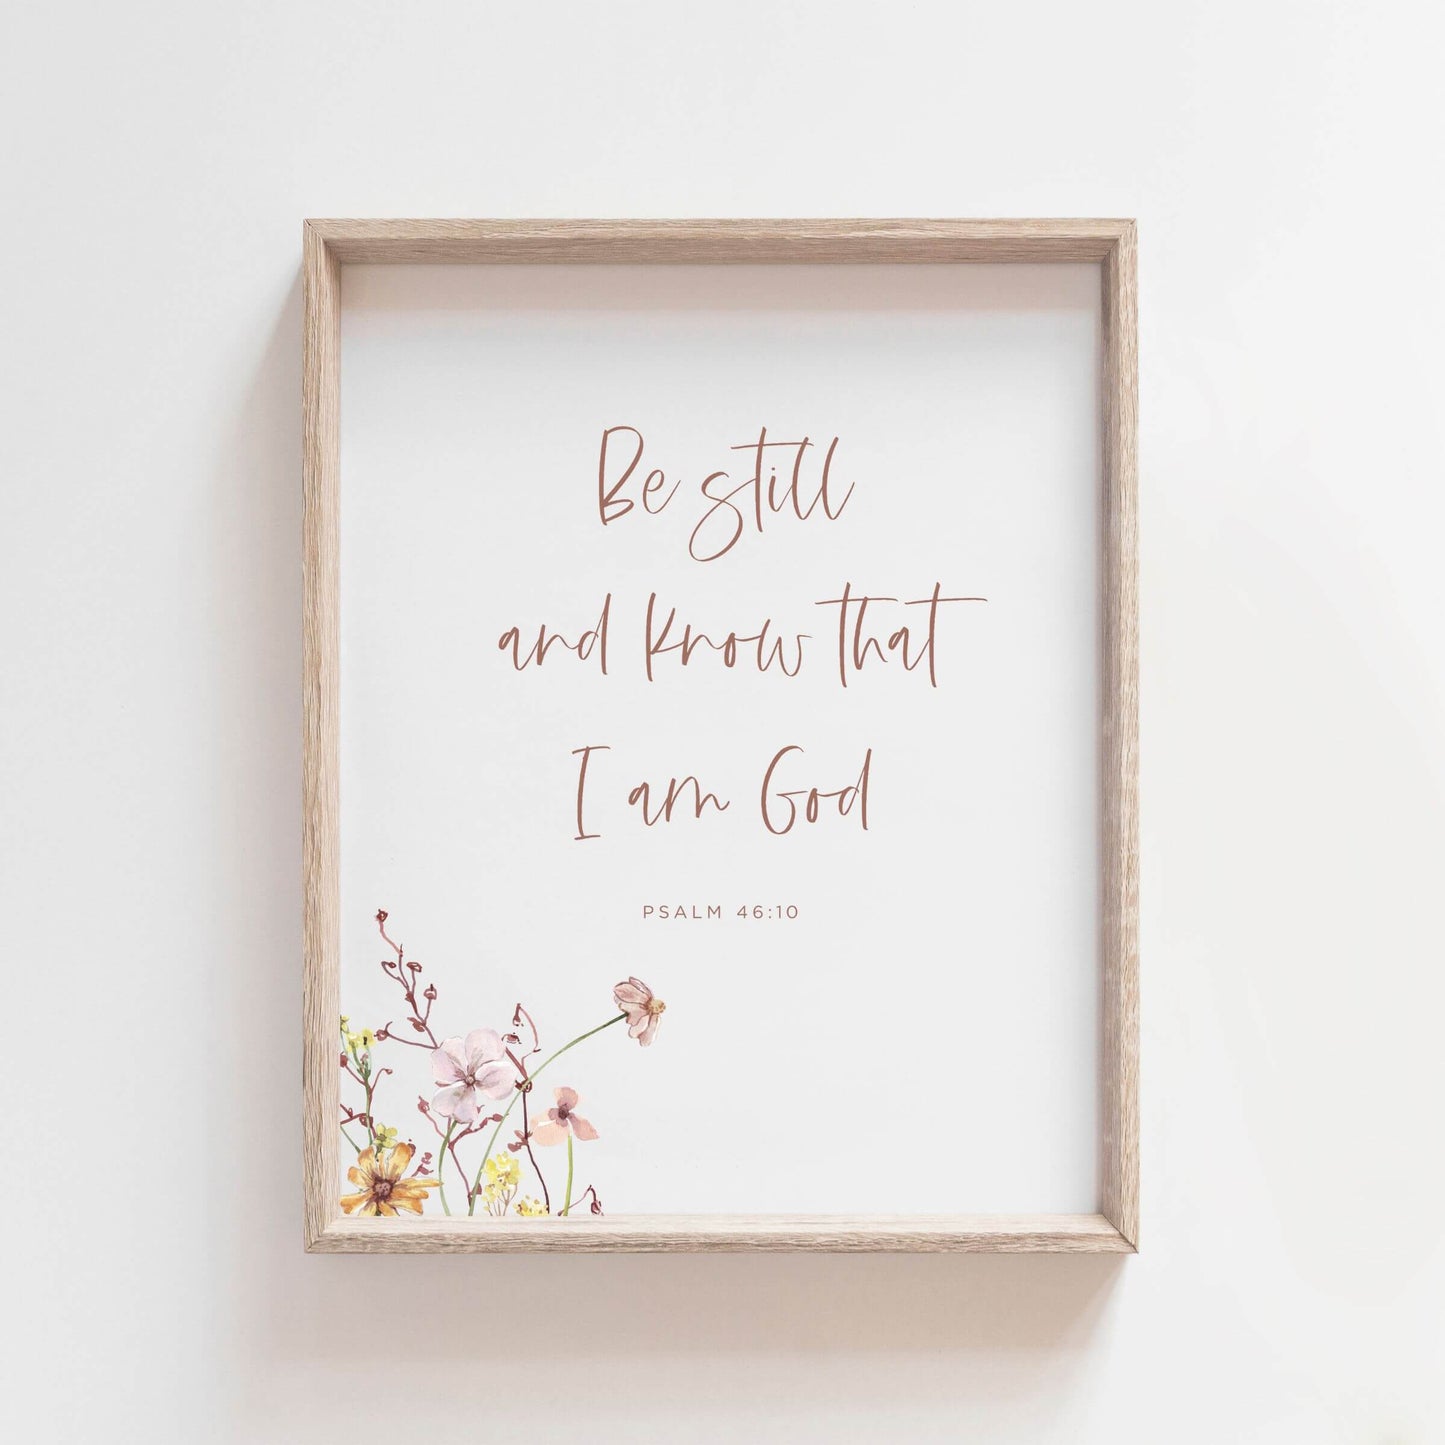 Psalm 46:10 wall art with wildflowers in a wooden frame